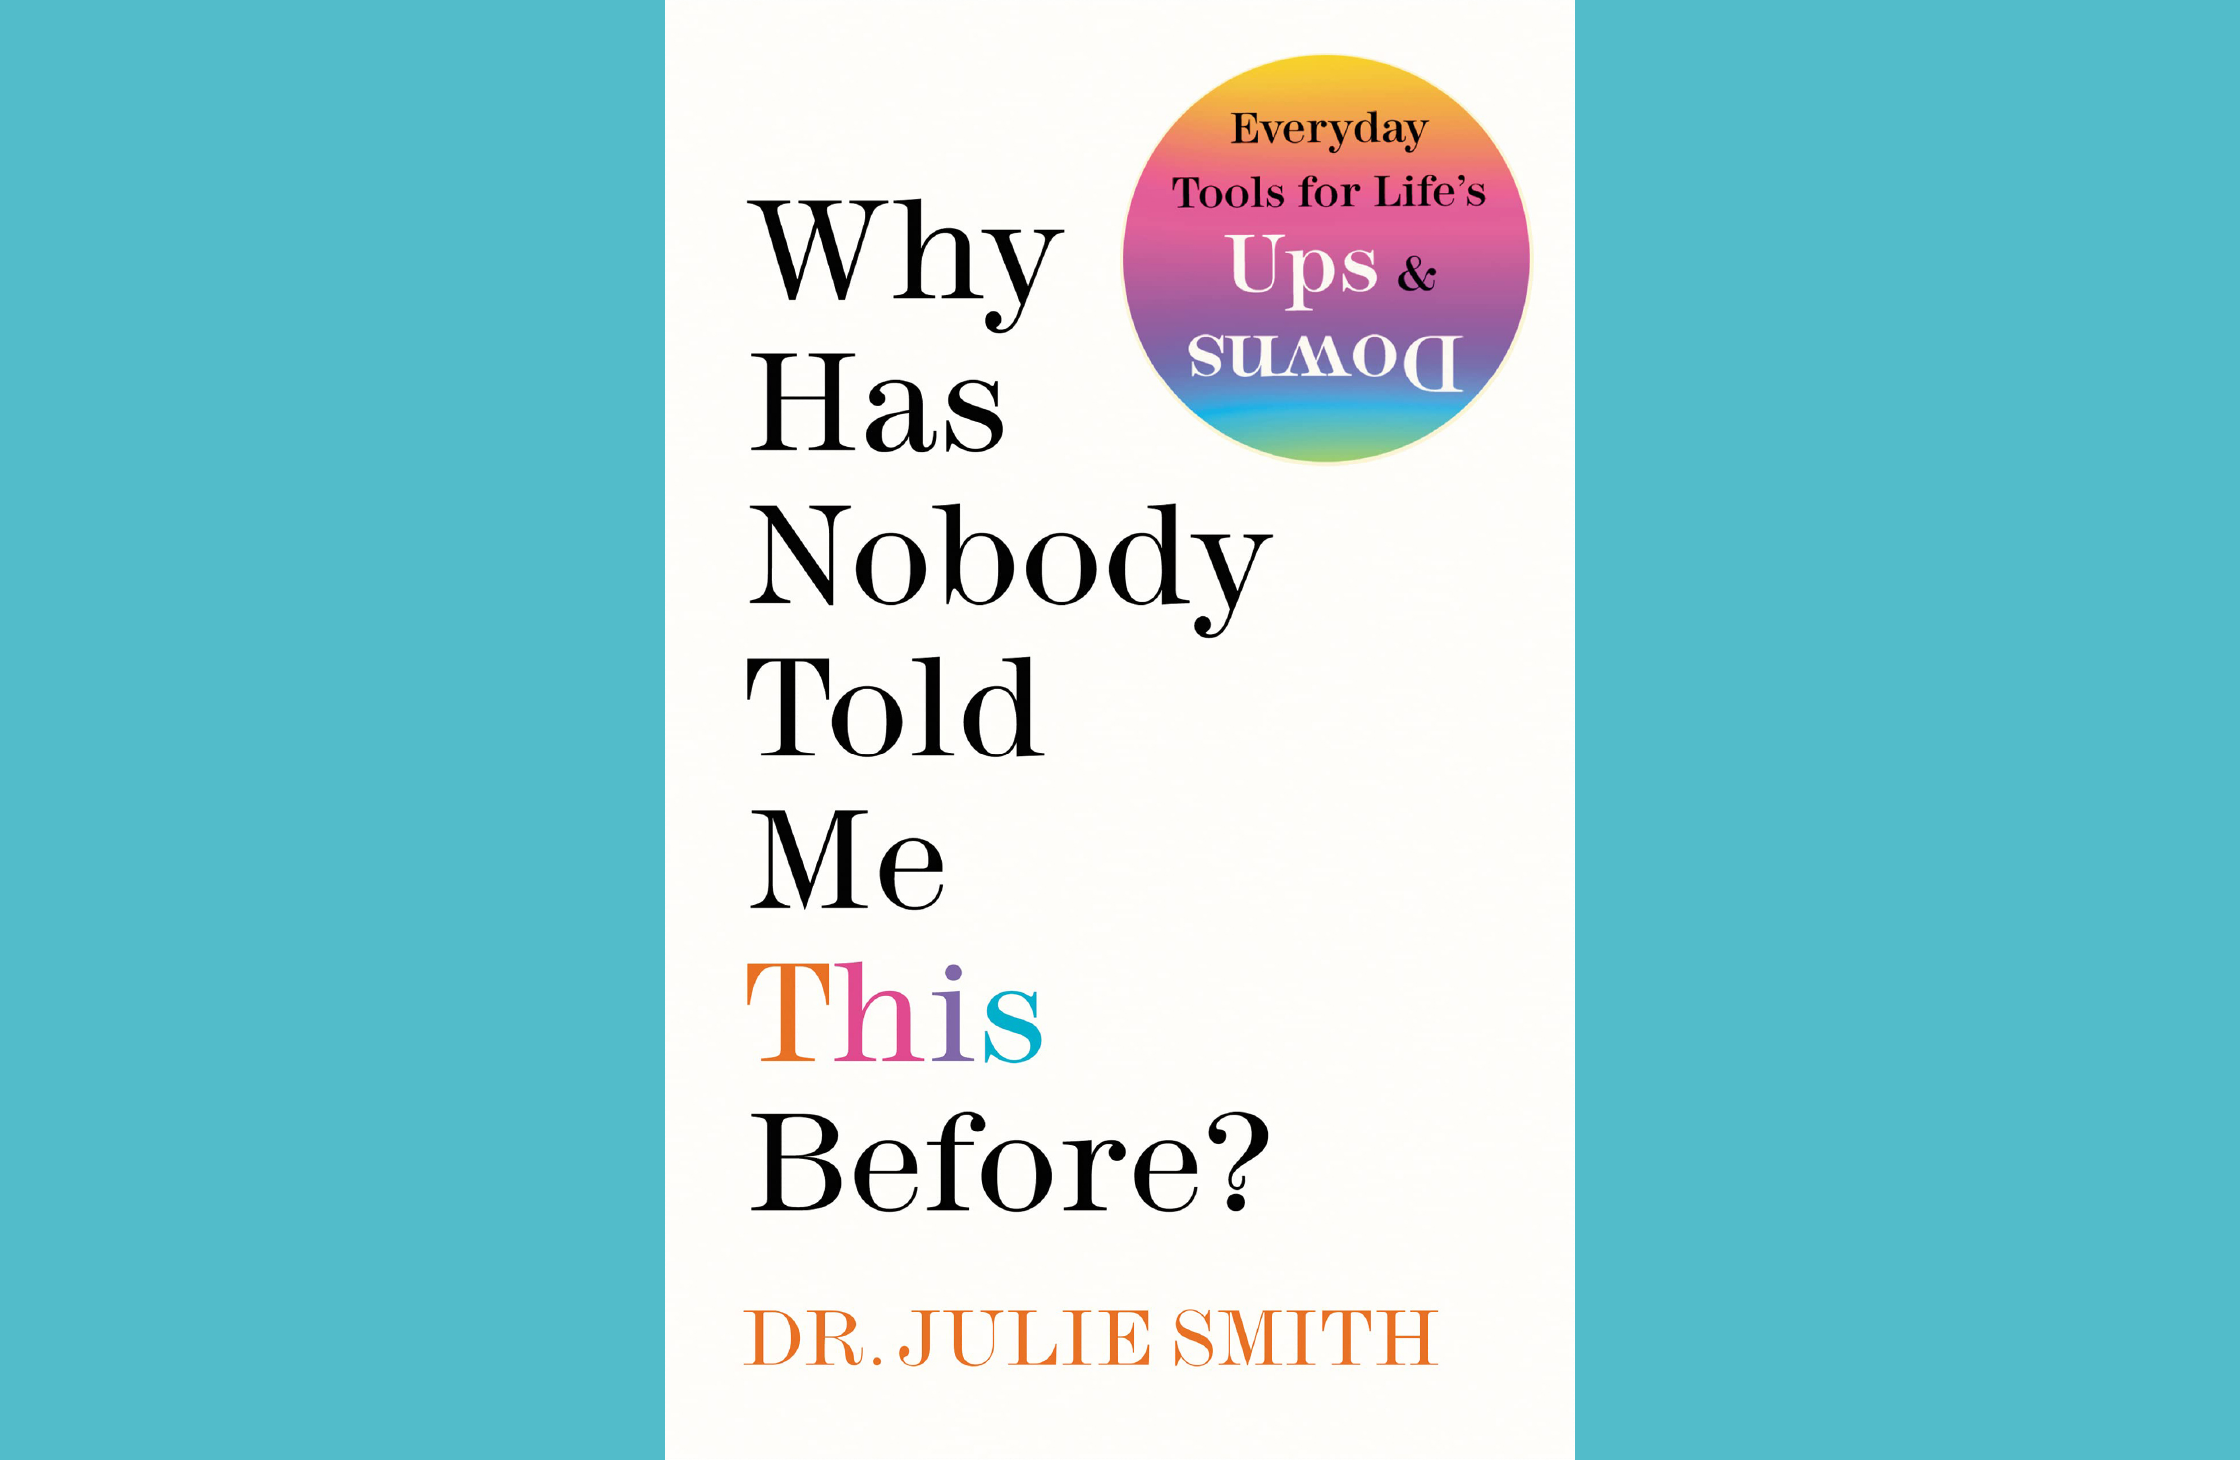 Summary: Why Has Nobody Told Me This Before? By Julie Smith